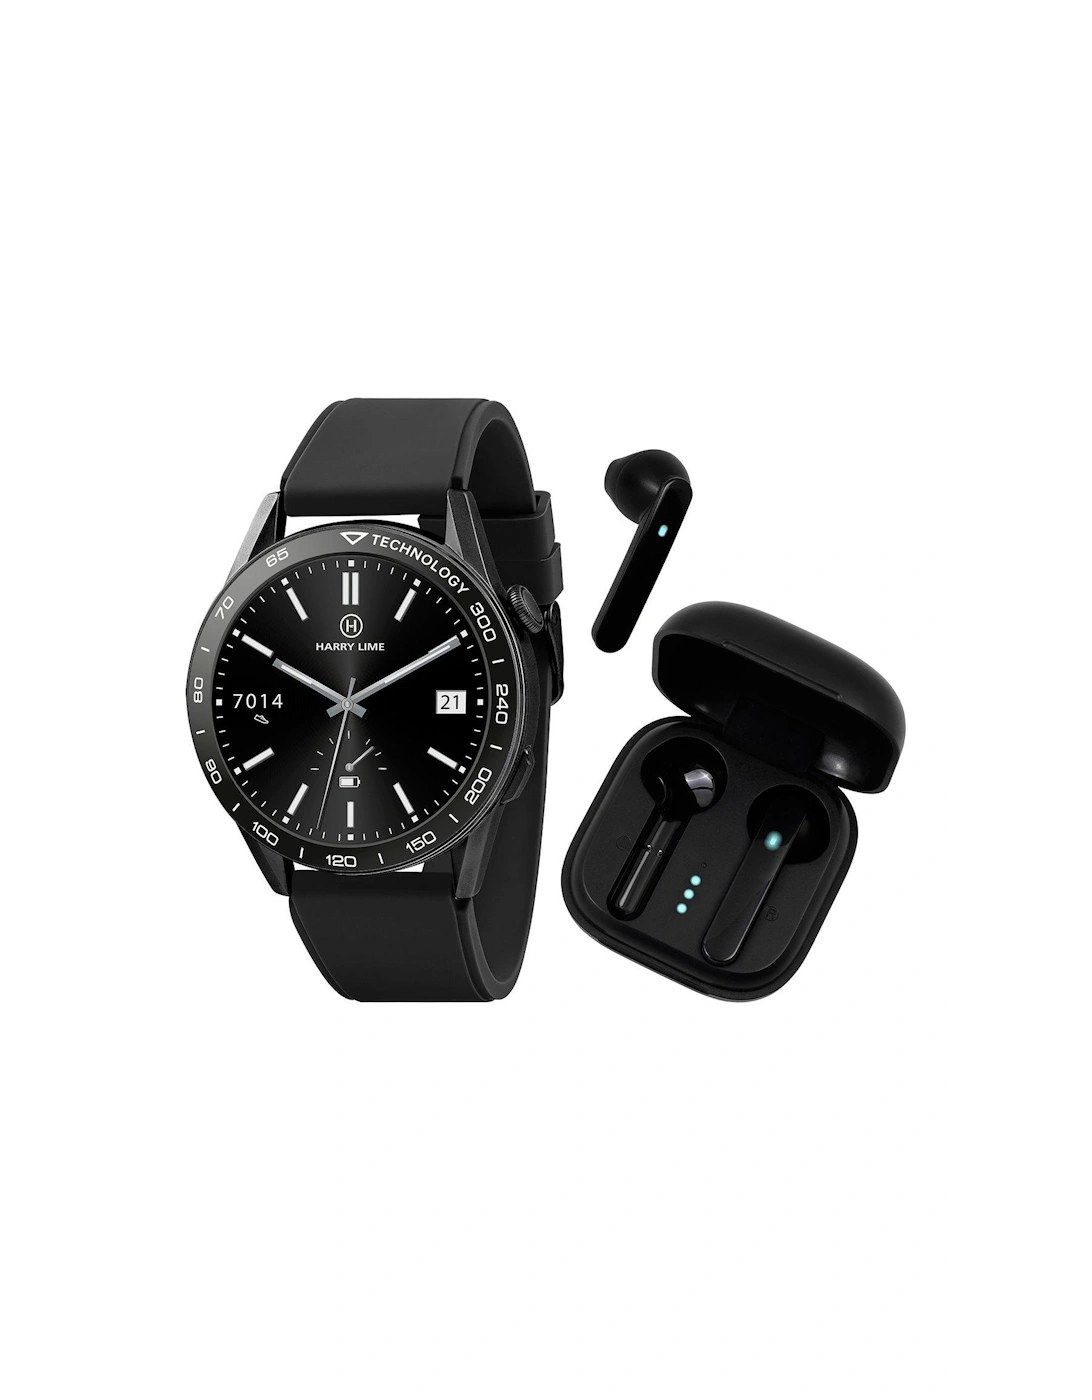 Series 27 black Silicone Strap Smart Watch With Black True Wireless Earphone In Charging Case, 3 of 2